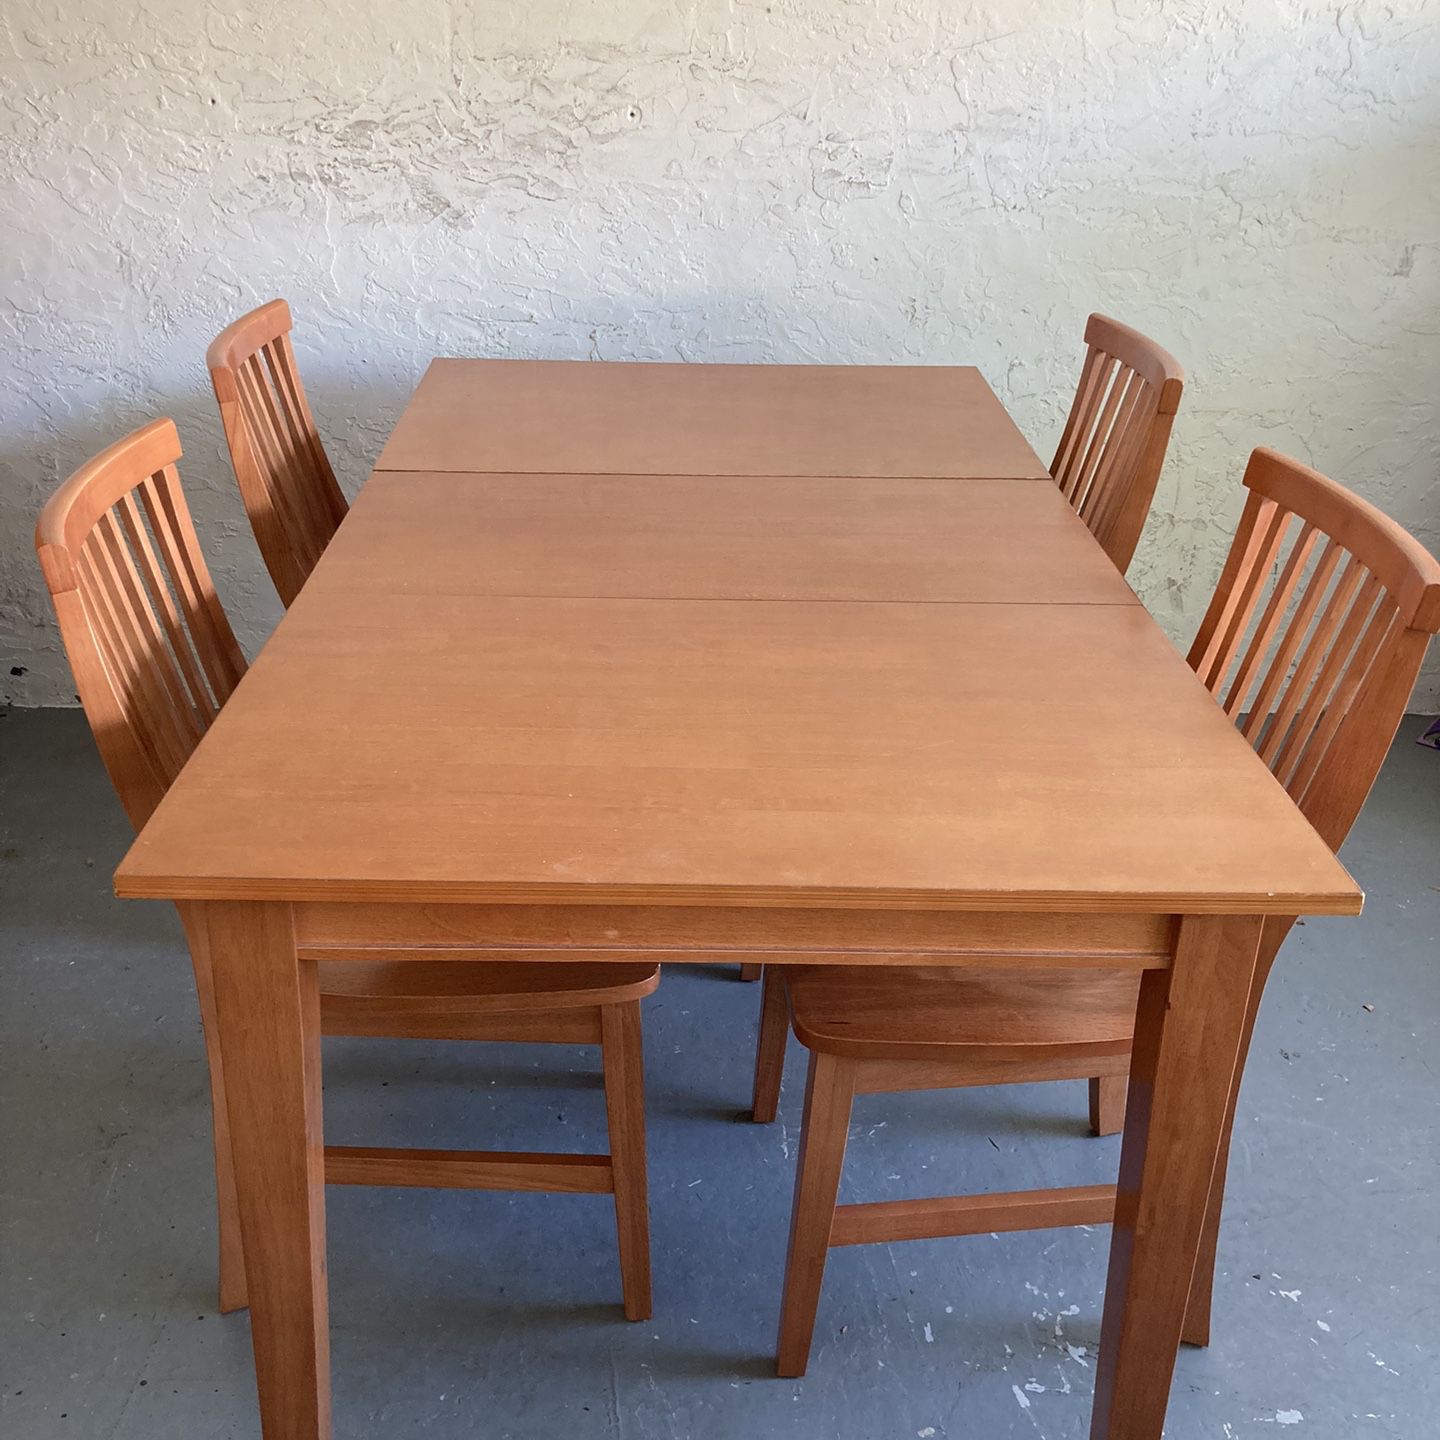 Wooden dining table with extension and 4 chairs